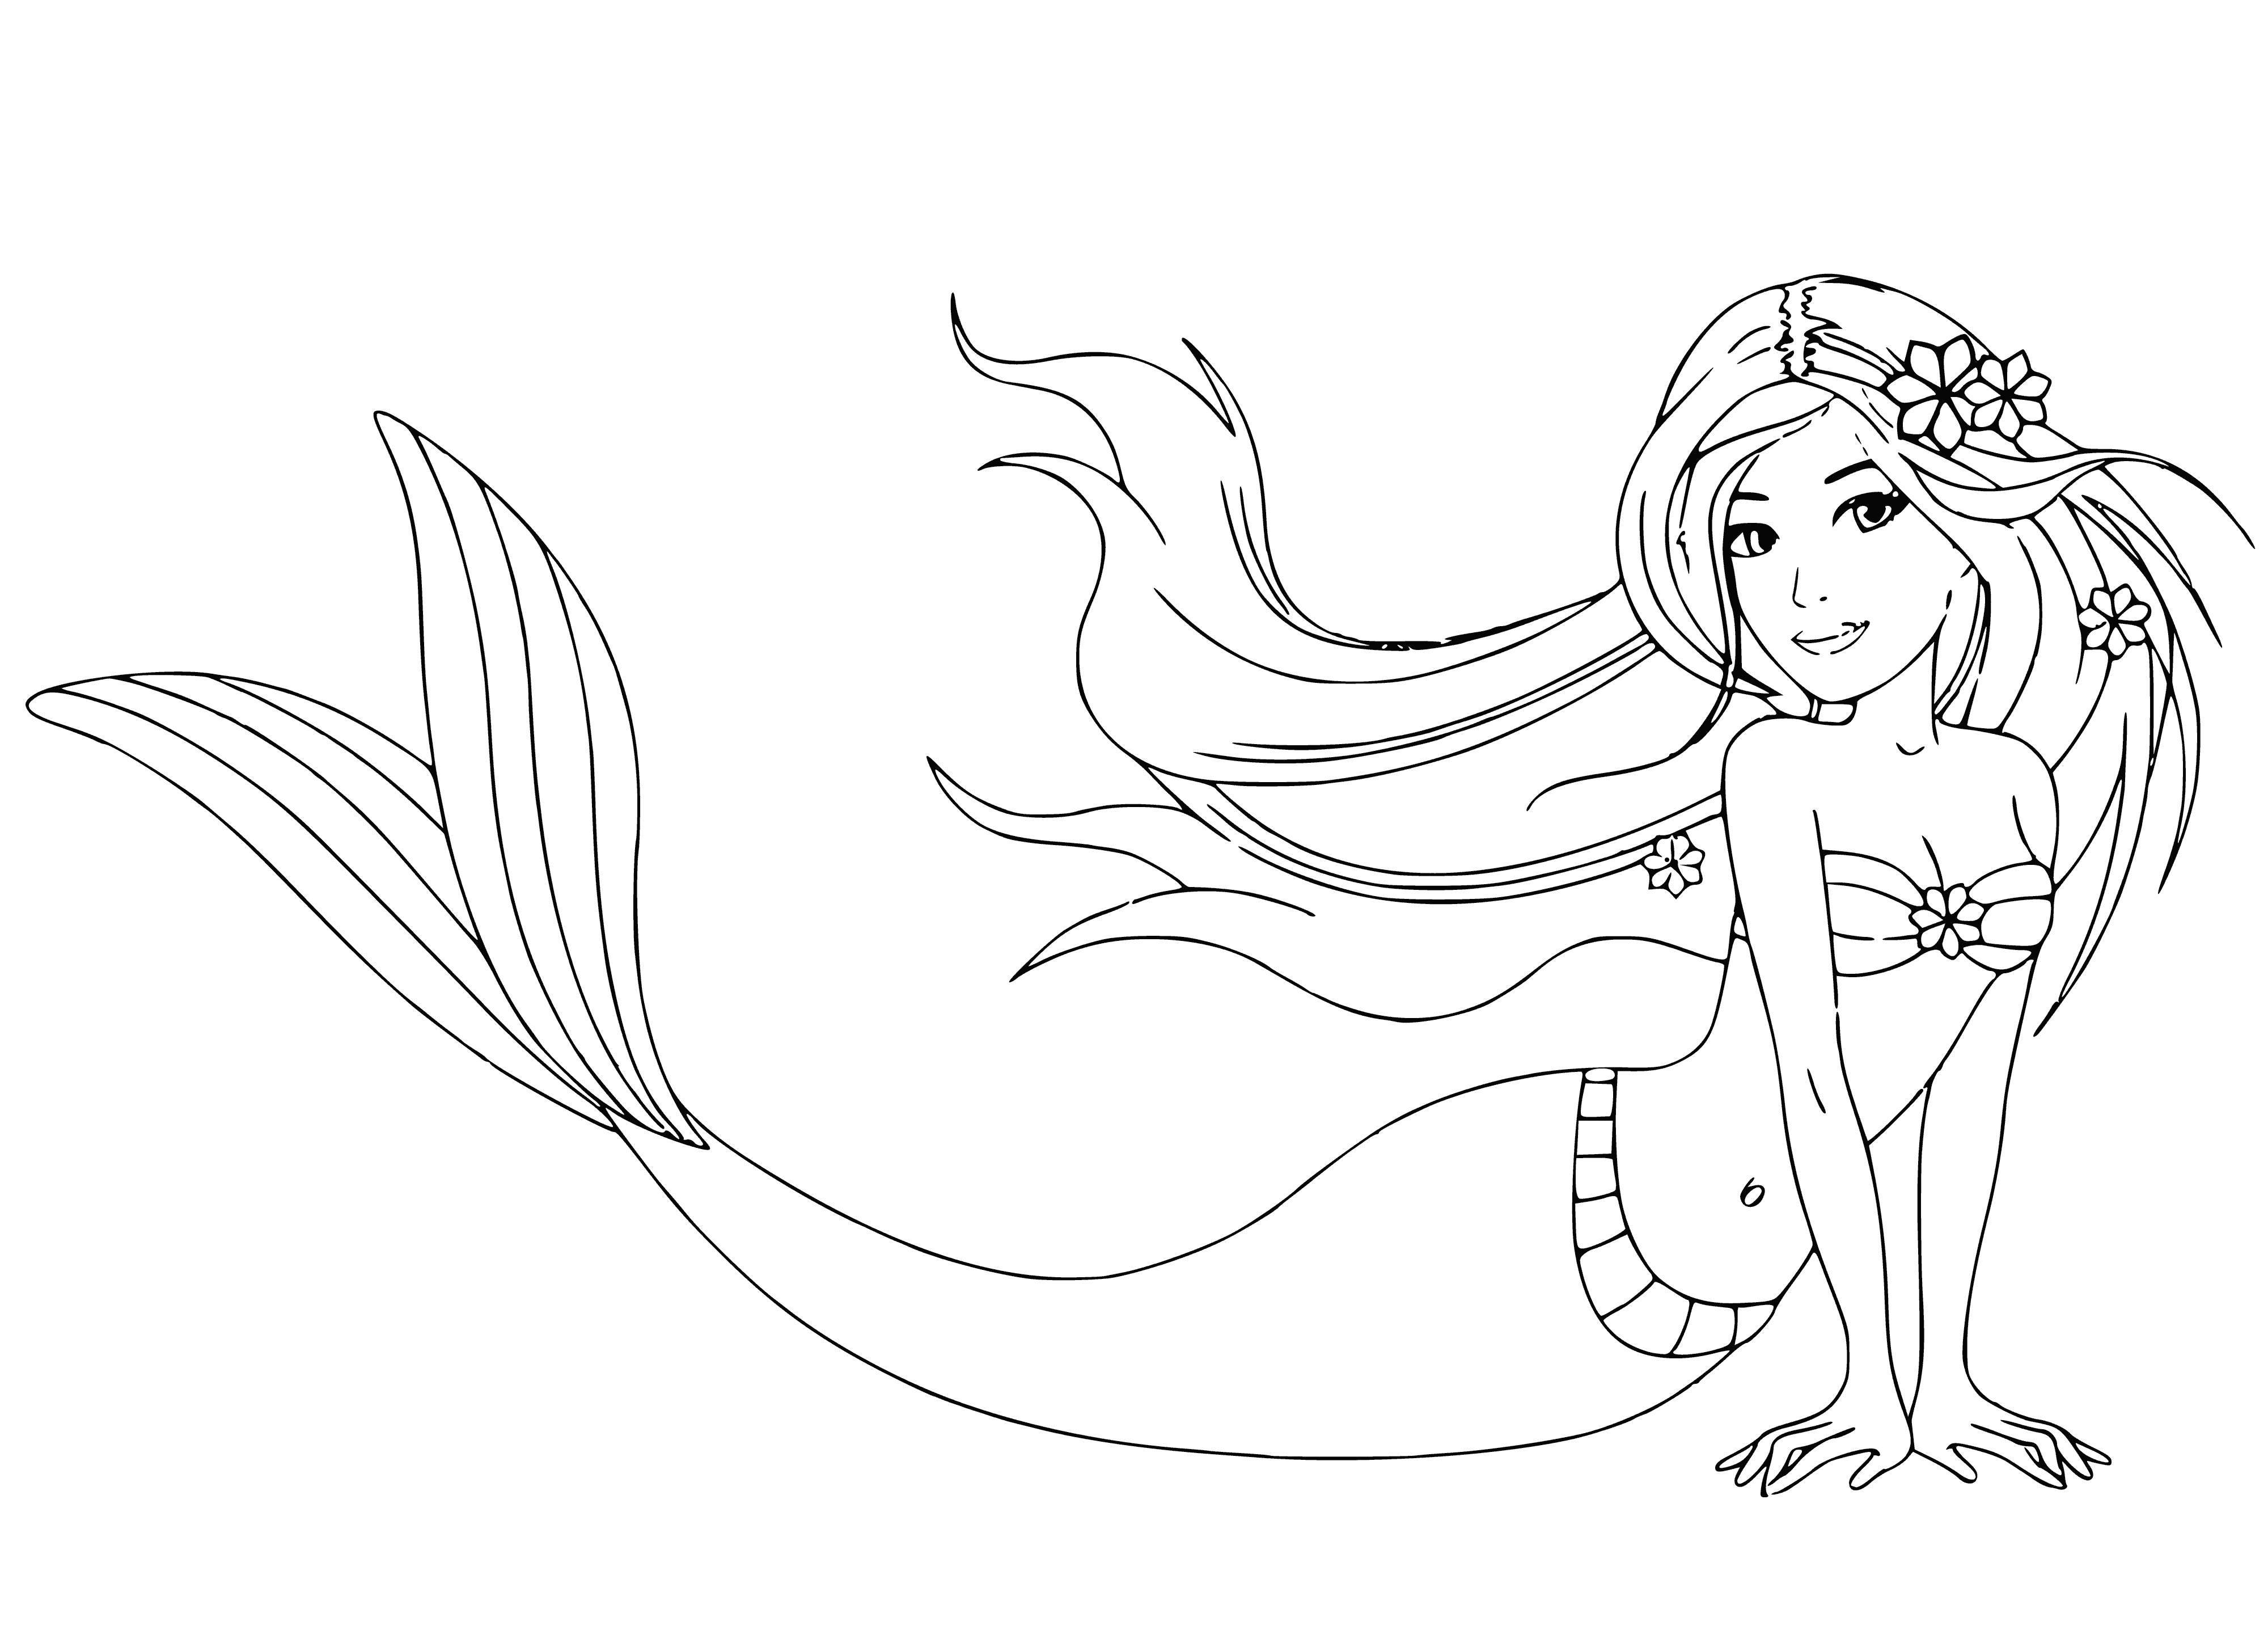 coloring page: 3 mermaids singing & playing instr. w/ long, flowing hair & fishtails, swimming in the water- a beautiful scene for any coloring book!